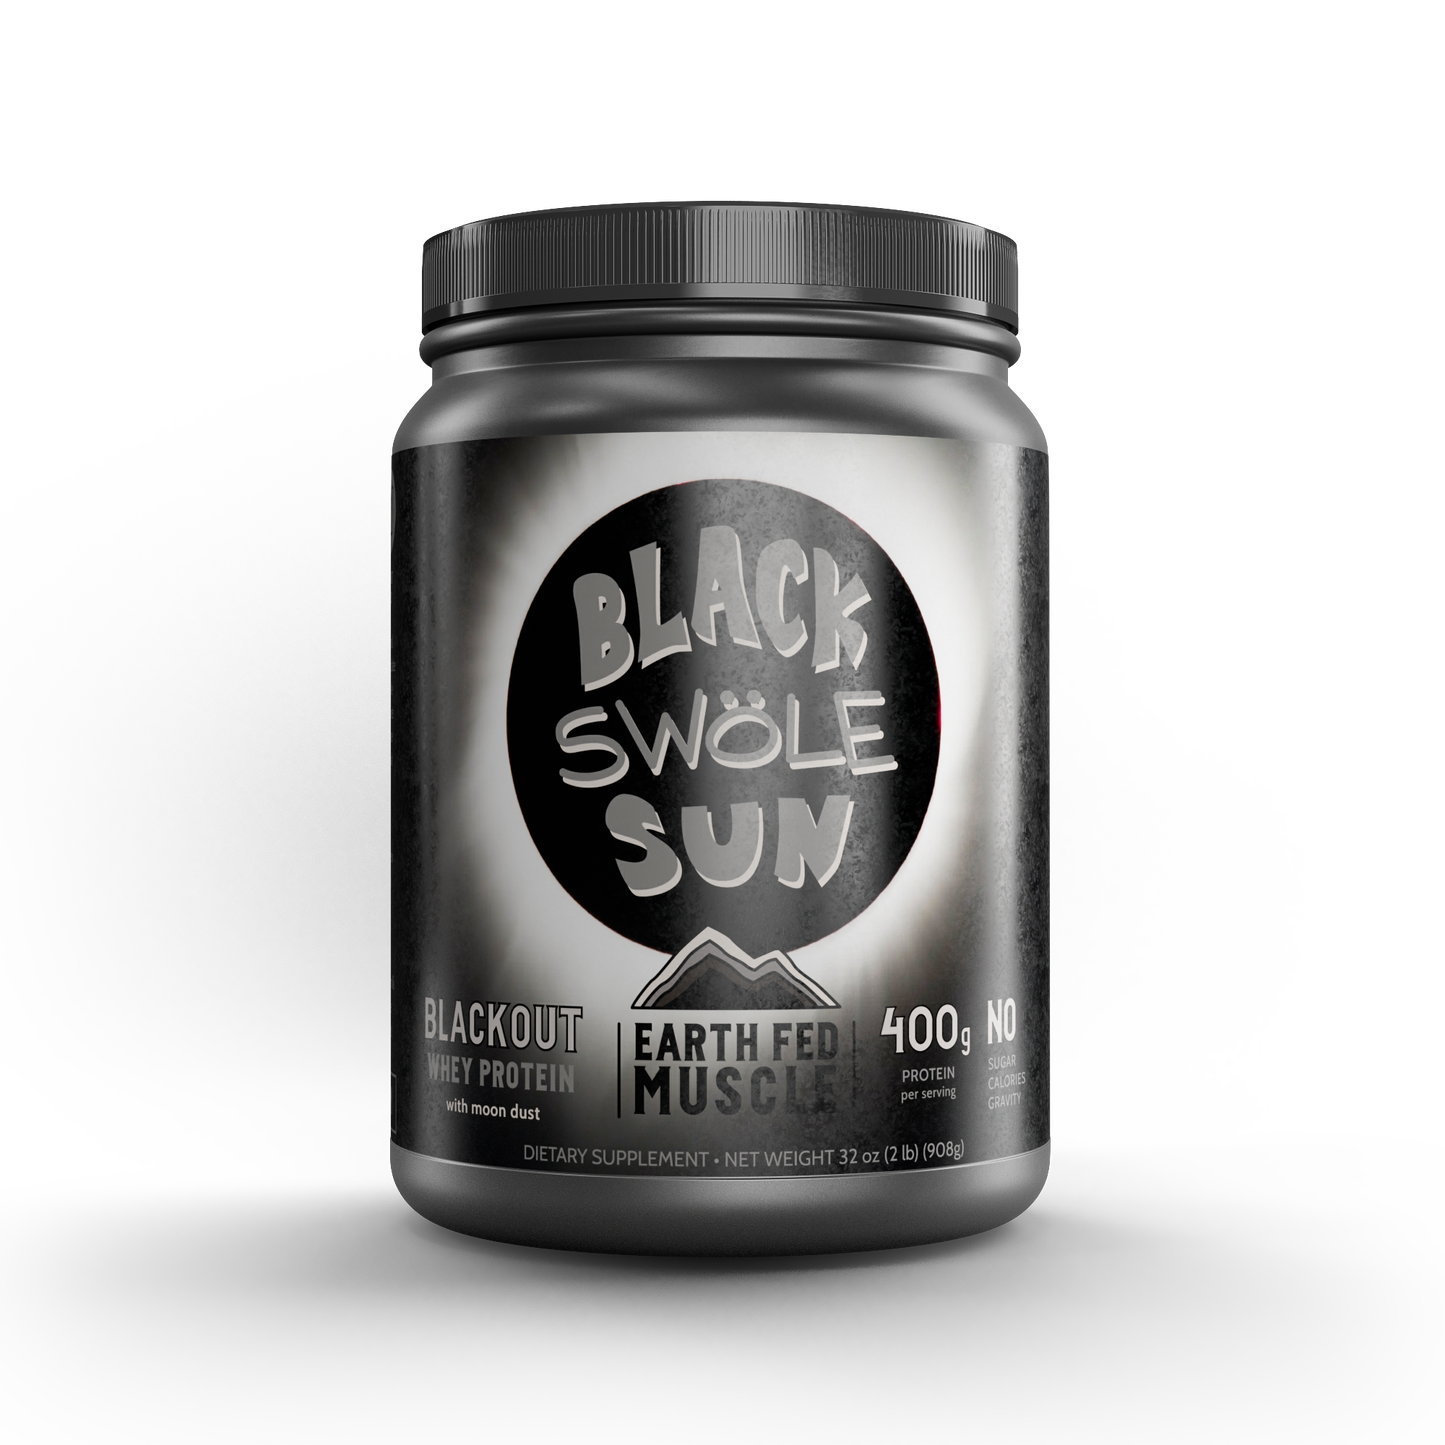 Black Swöle Sun Blackout Whey Protein with Moon Dust